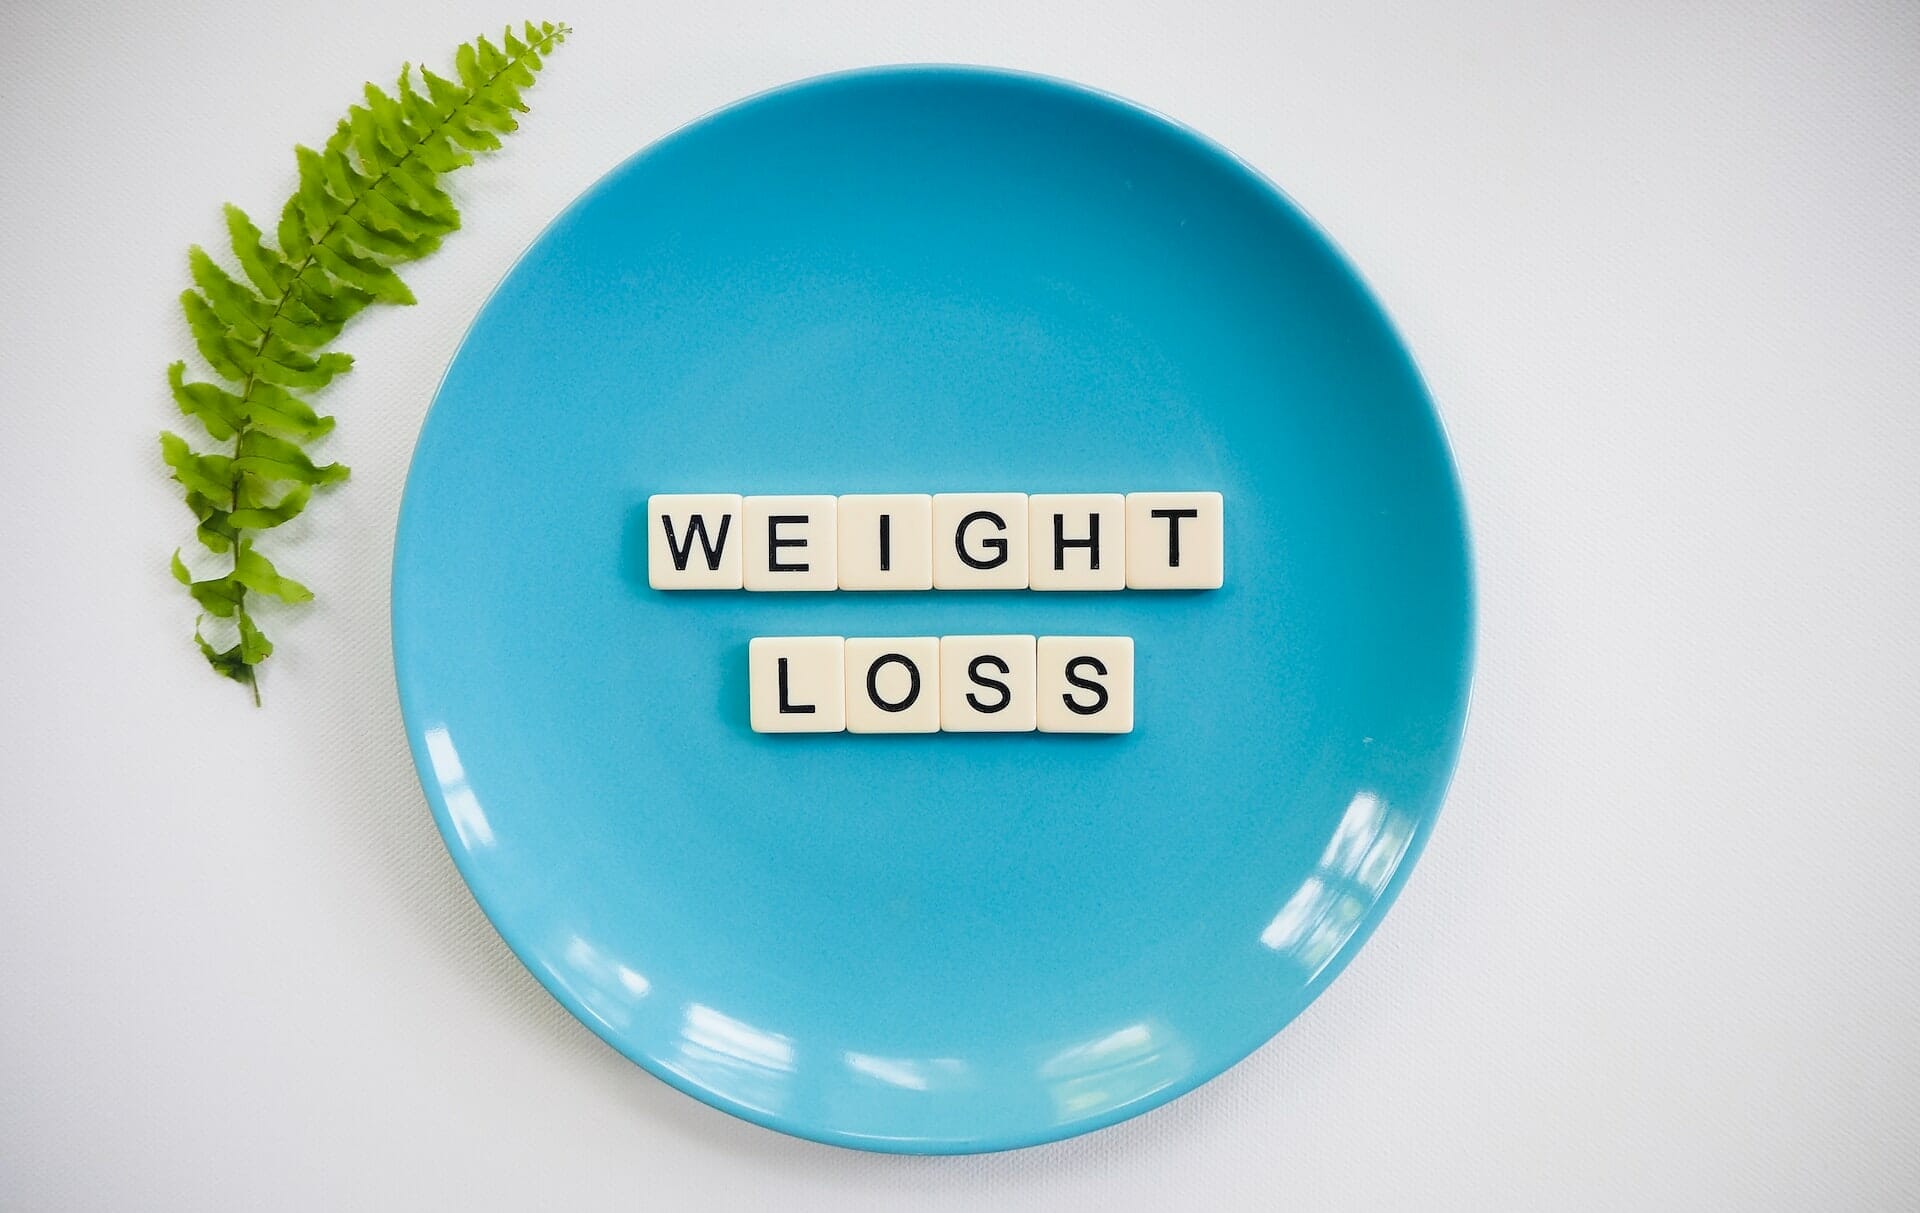 Scrabble pieces spell out "weight loss" on a plate